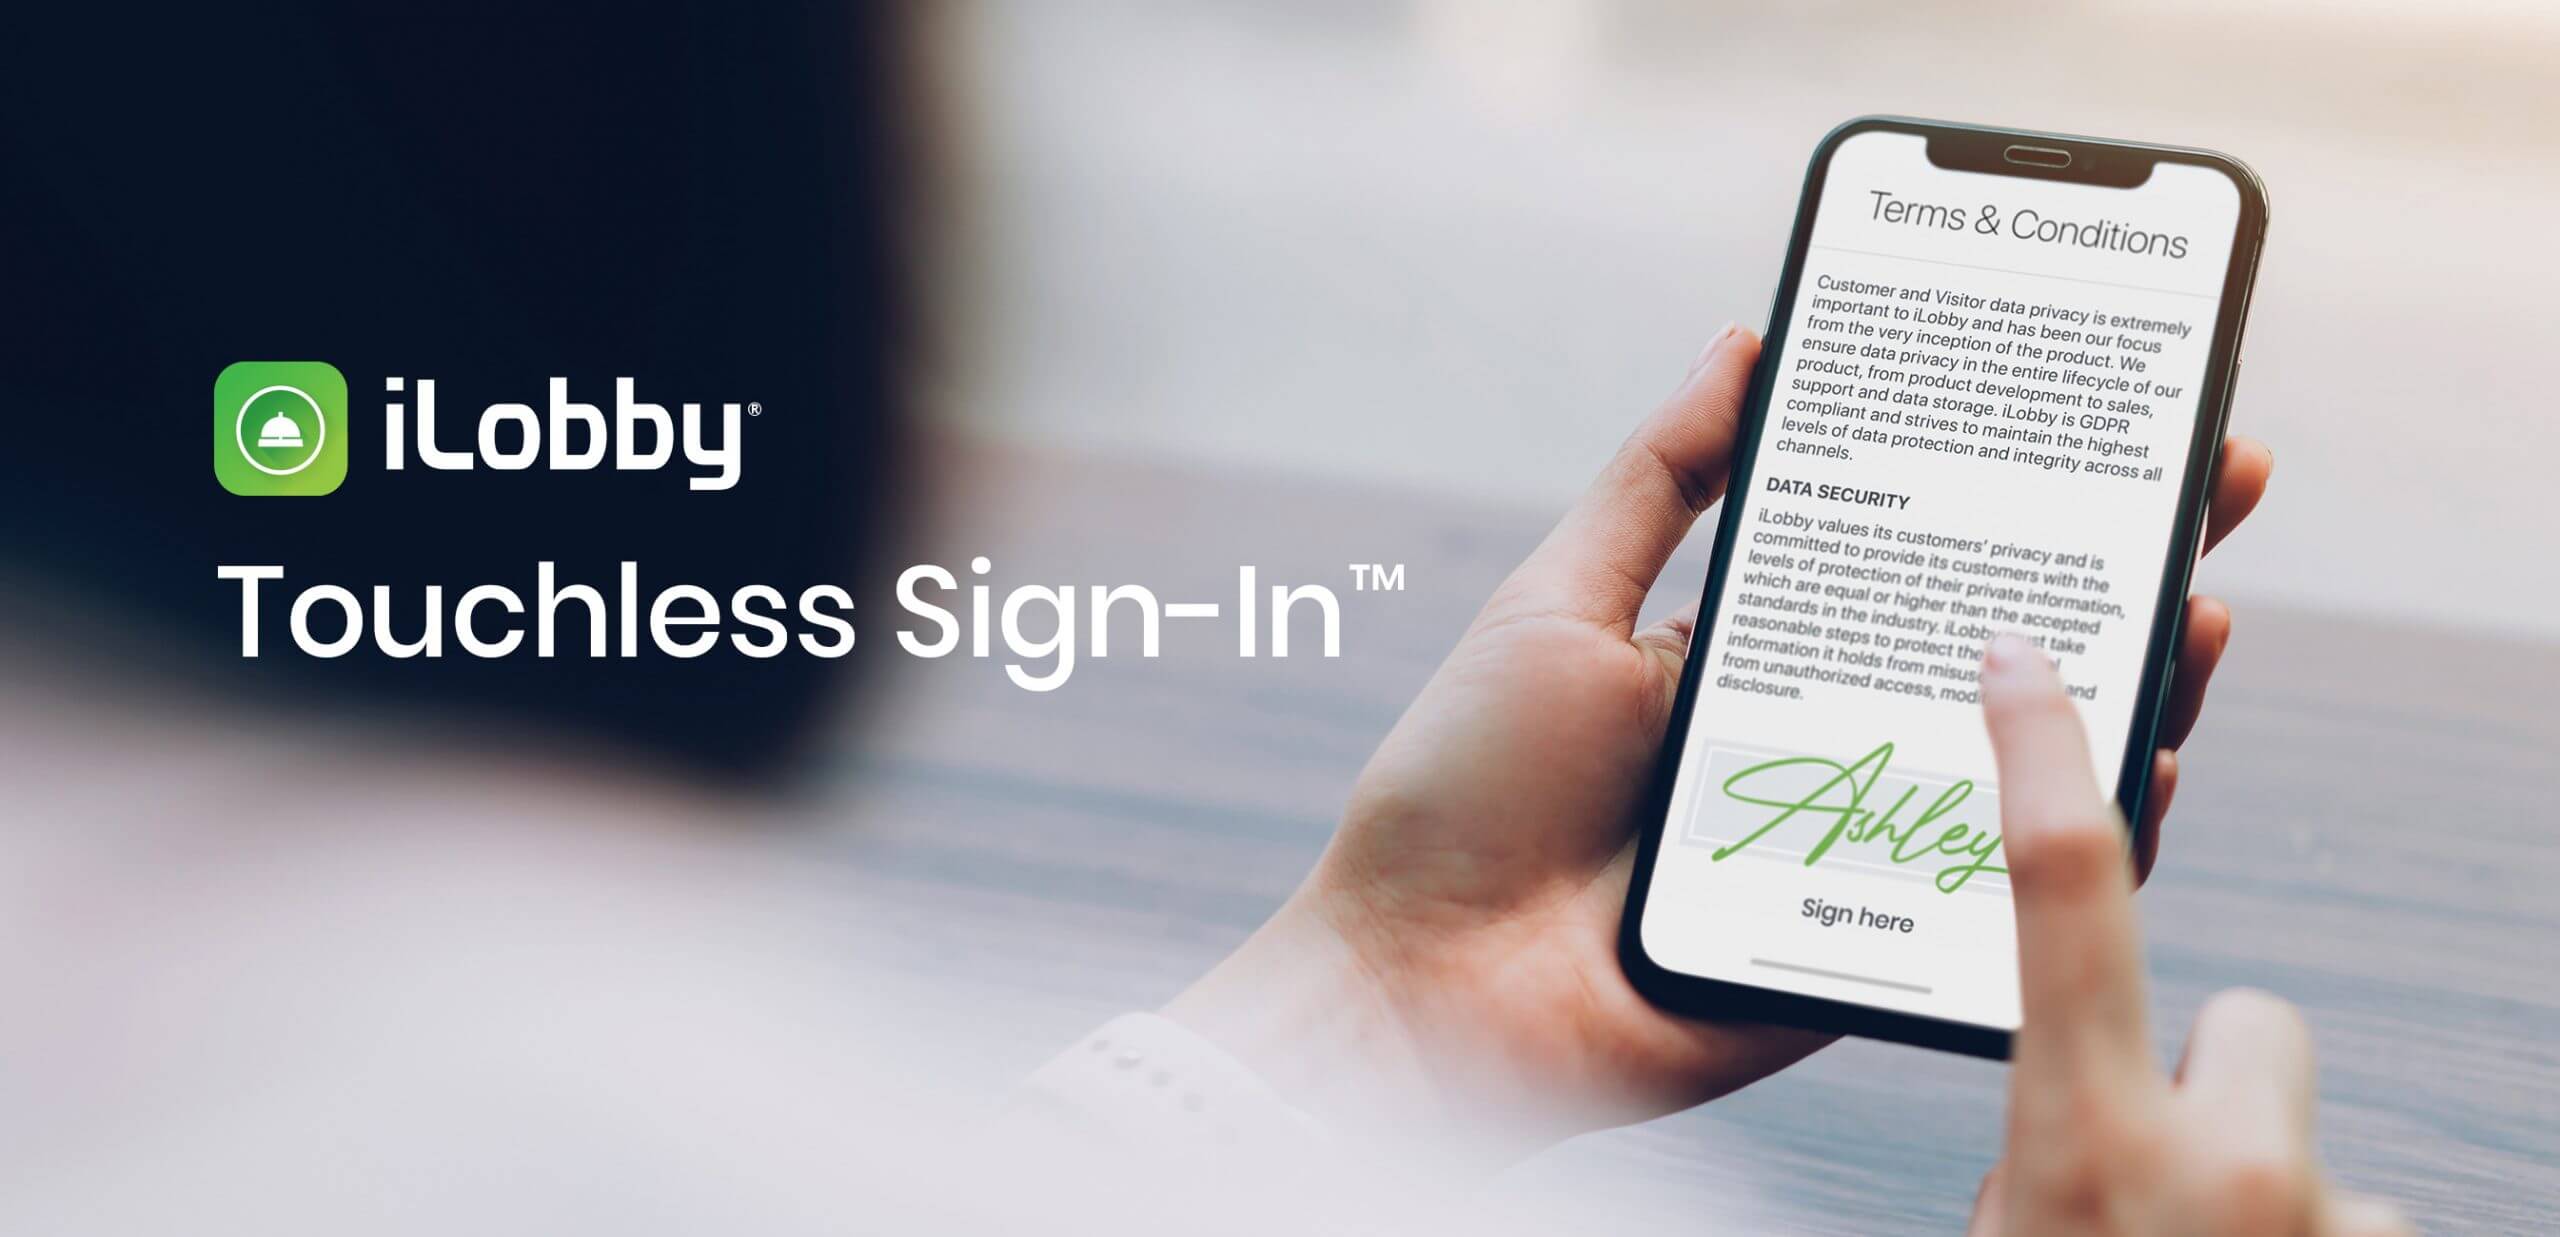 Introducing: iLobby Touchless Sign-In™